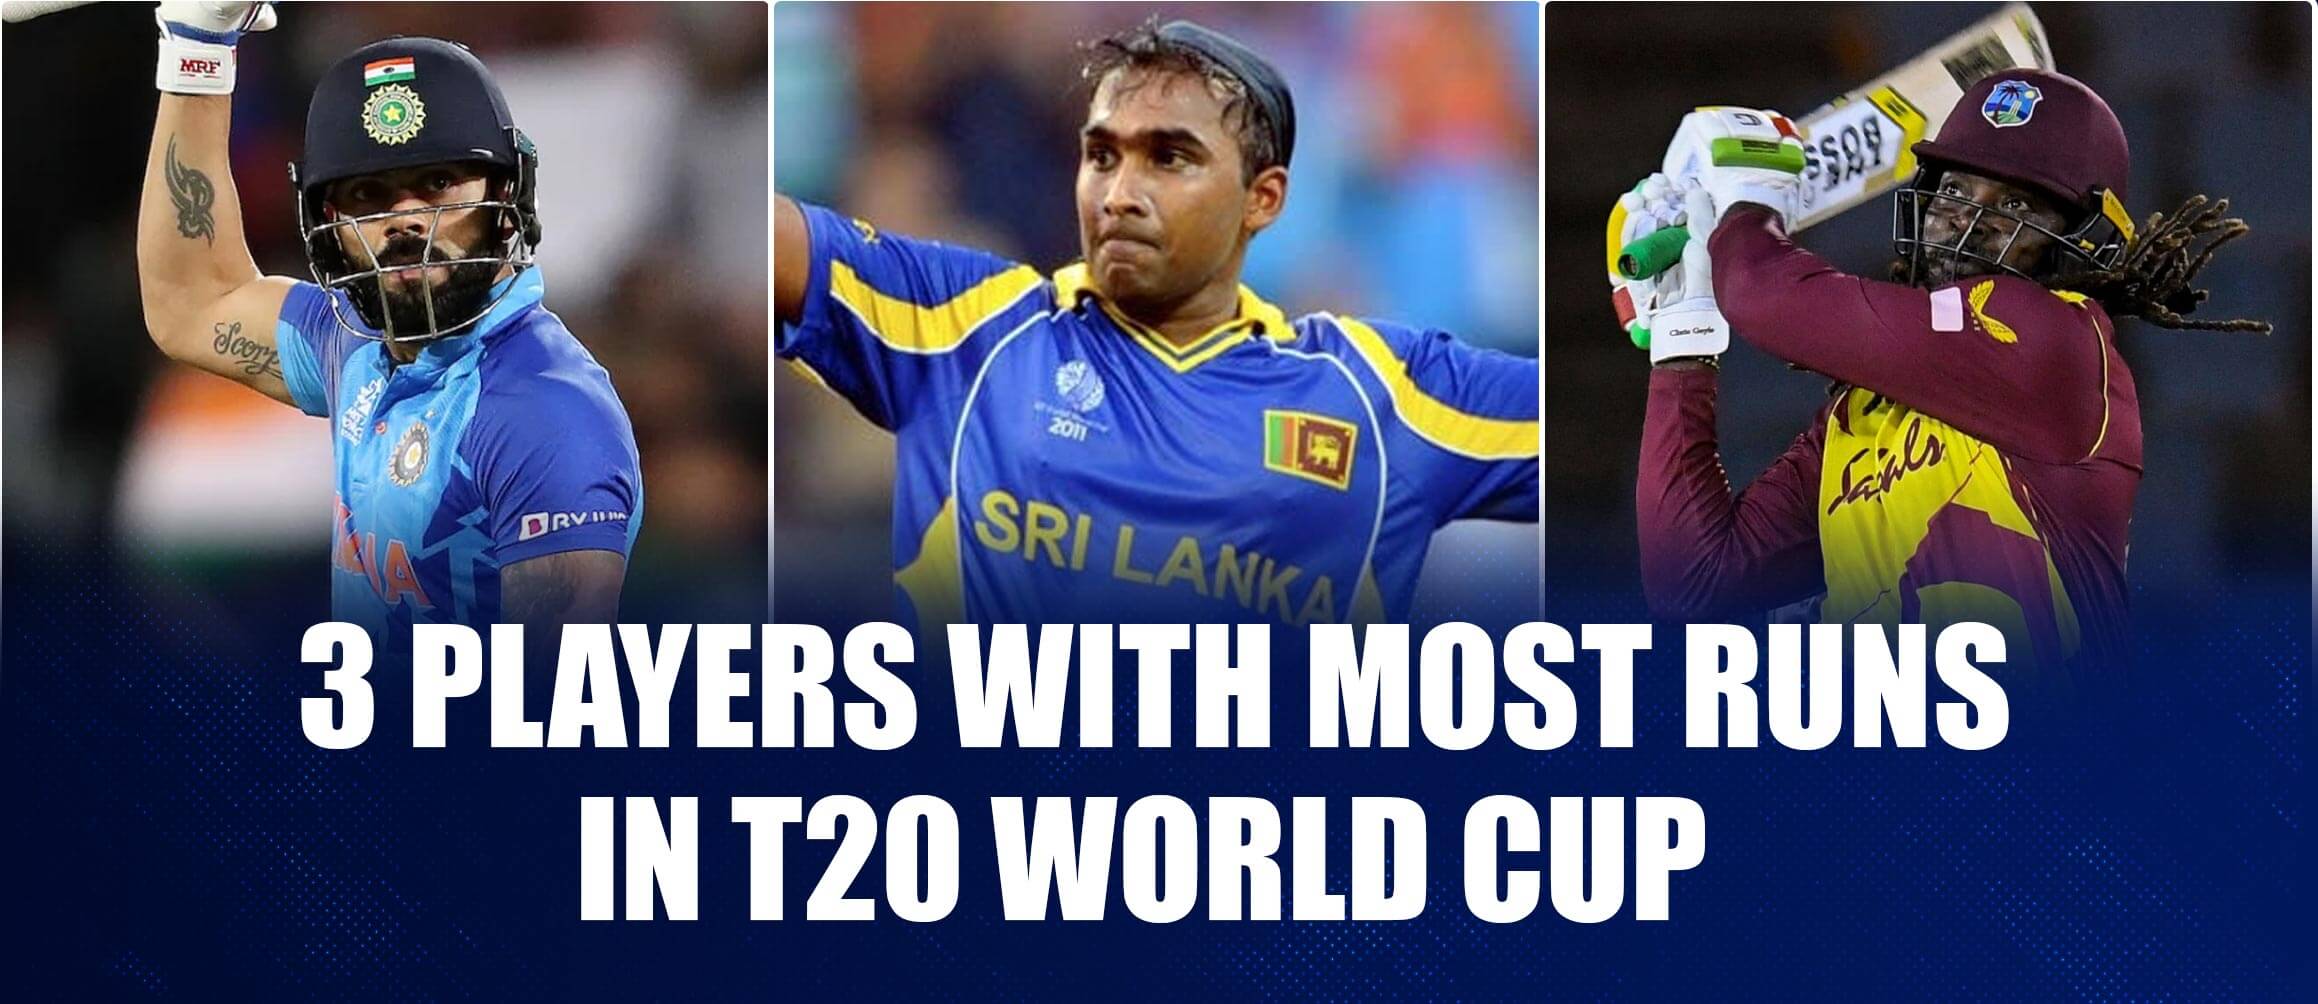 3 Players with Most Runs in T20 World Cup